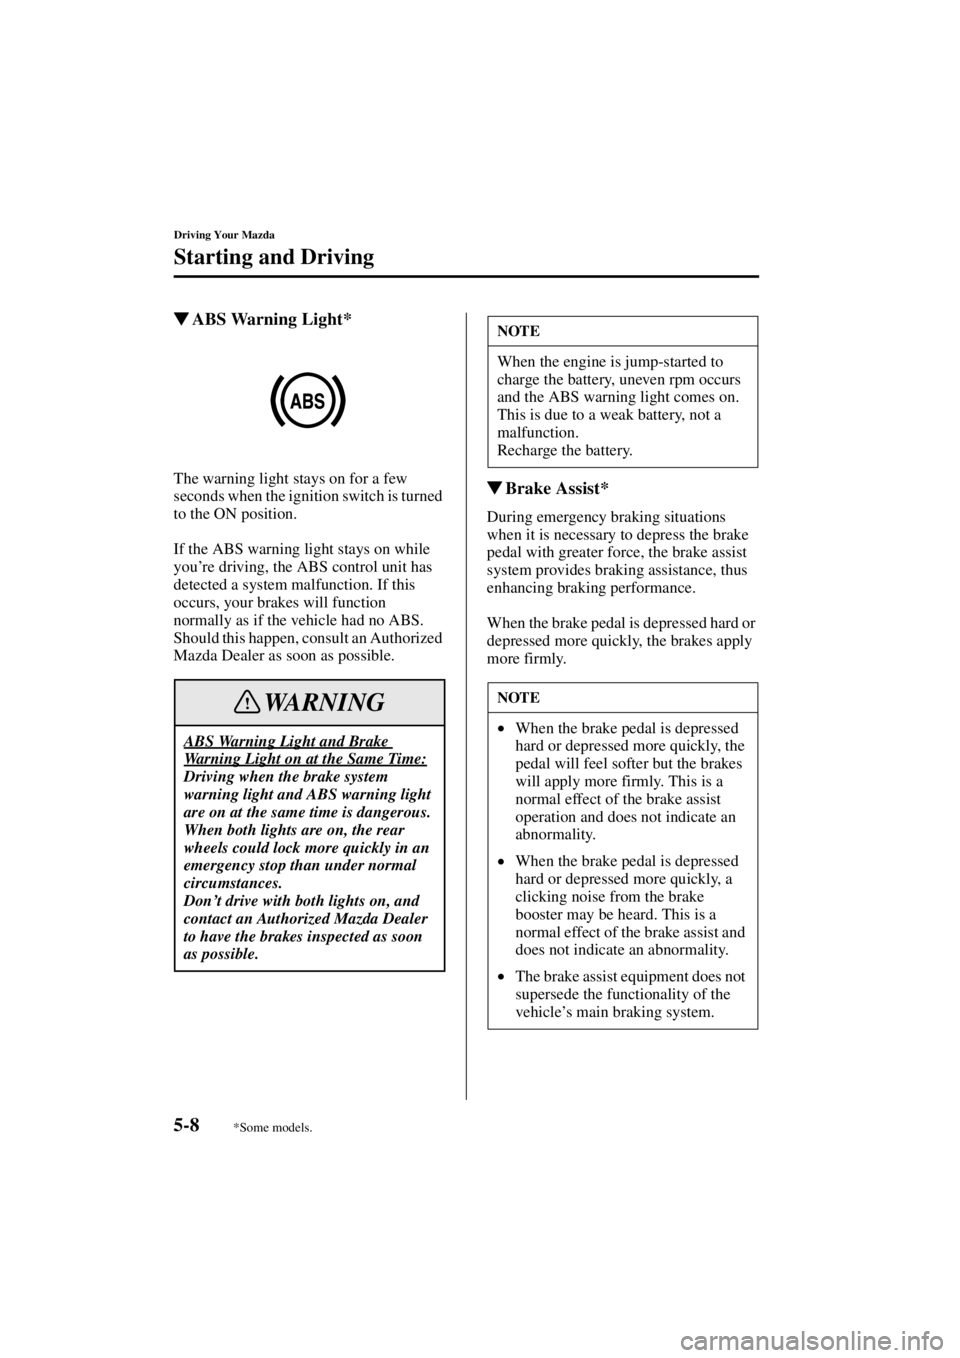 MAZDA MODEL 3 5-DOOR 2004  Owners Manual 5-8
Driving Your Mazda
Starting and Driving
Form No. 8S18-EA-03I
ABS Warning Light*
The warning light stays on for a few 
seconds when the ignition switch is turned 
to the ON position.
If the ABS wa